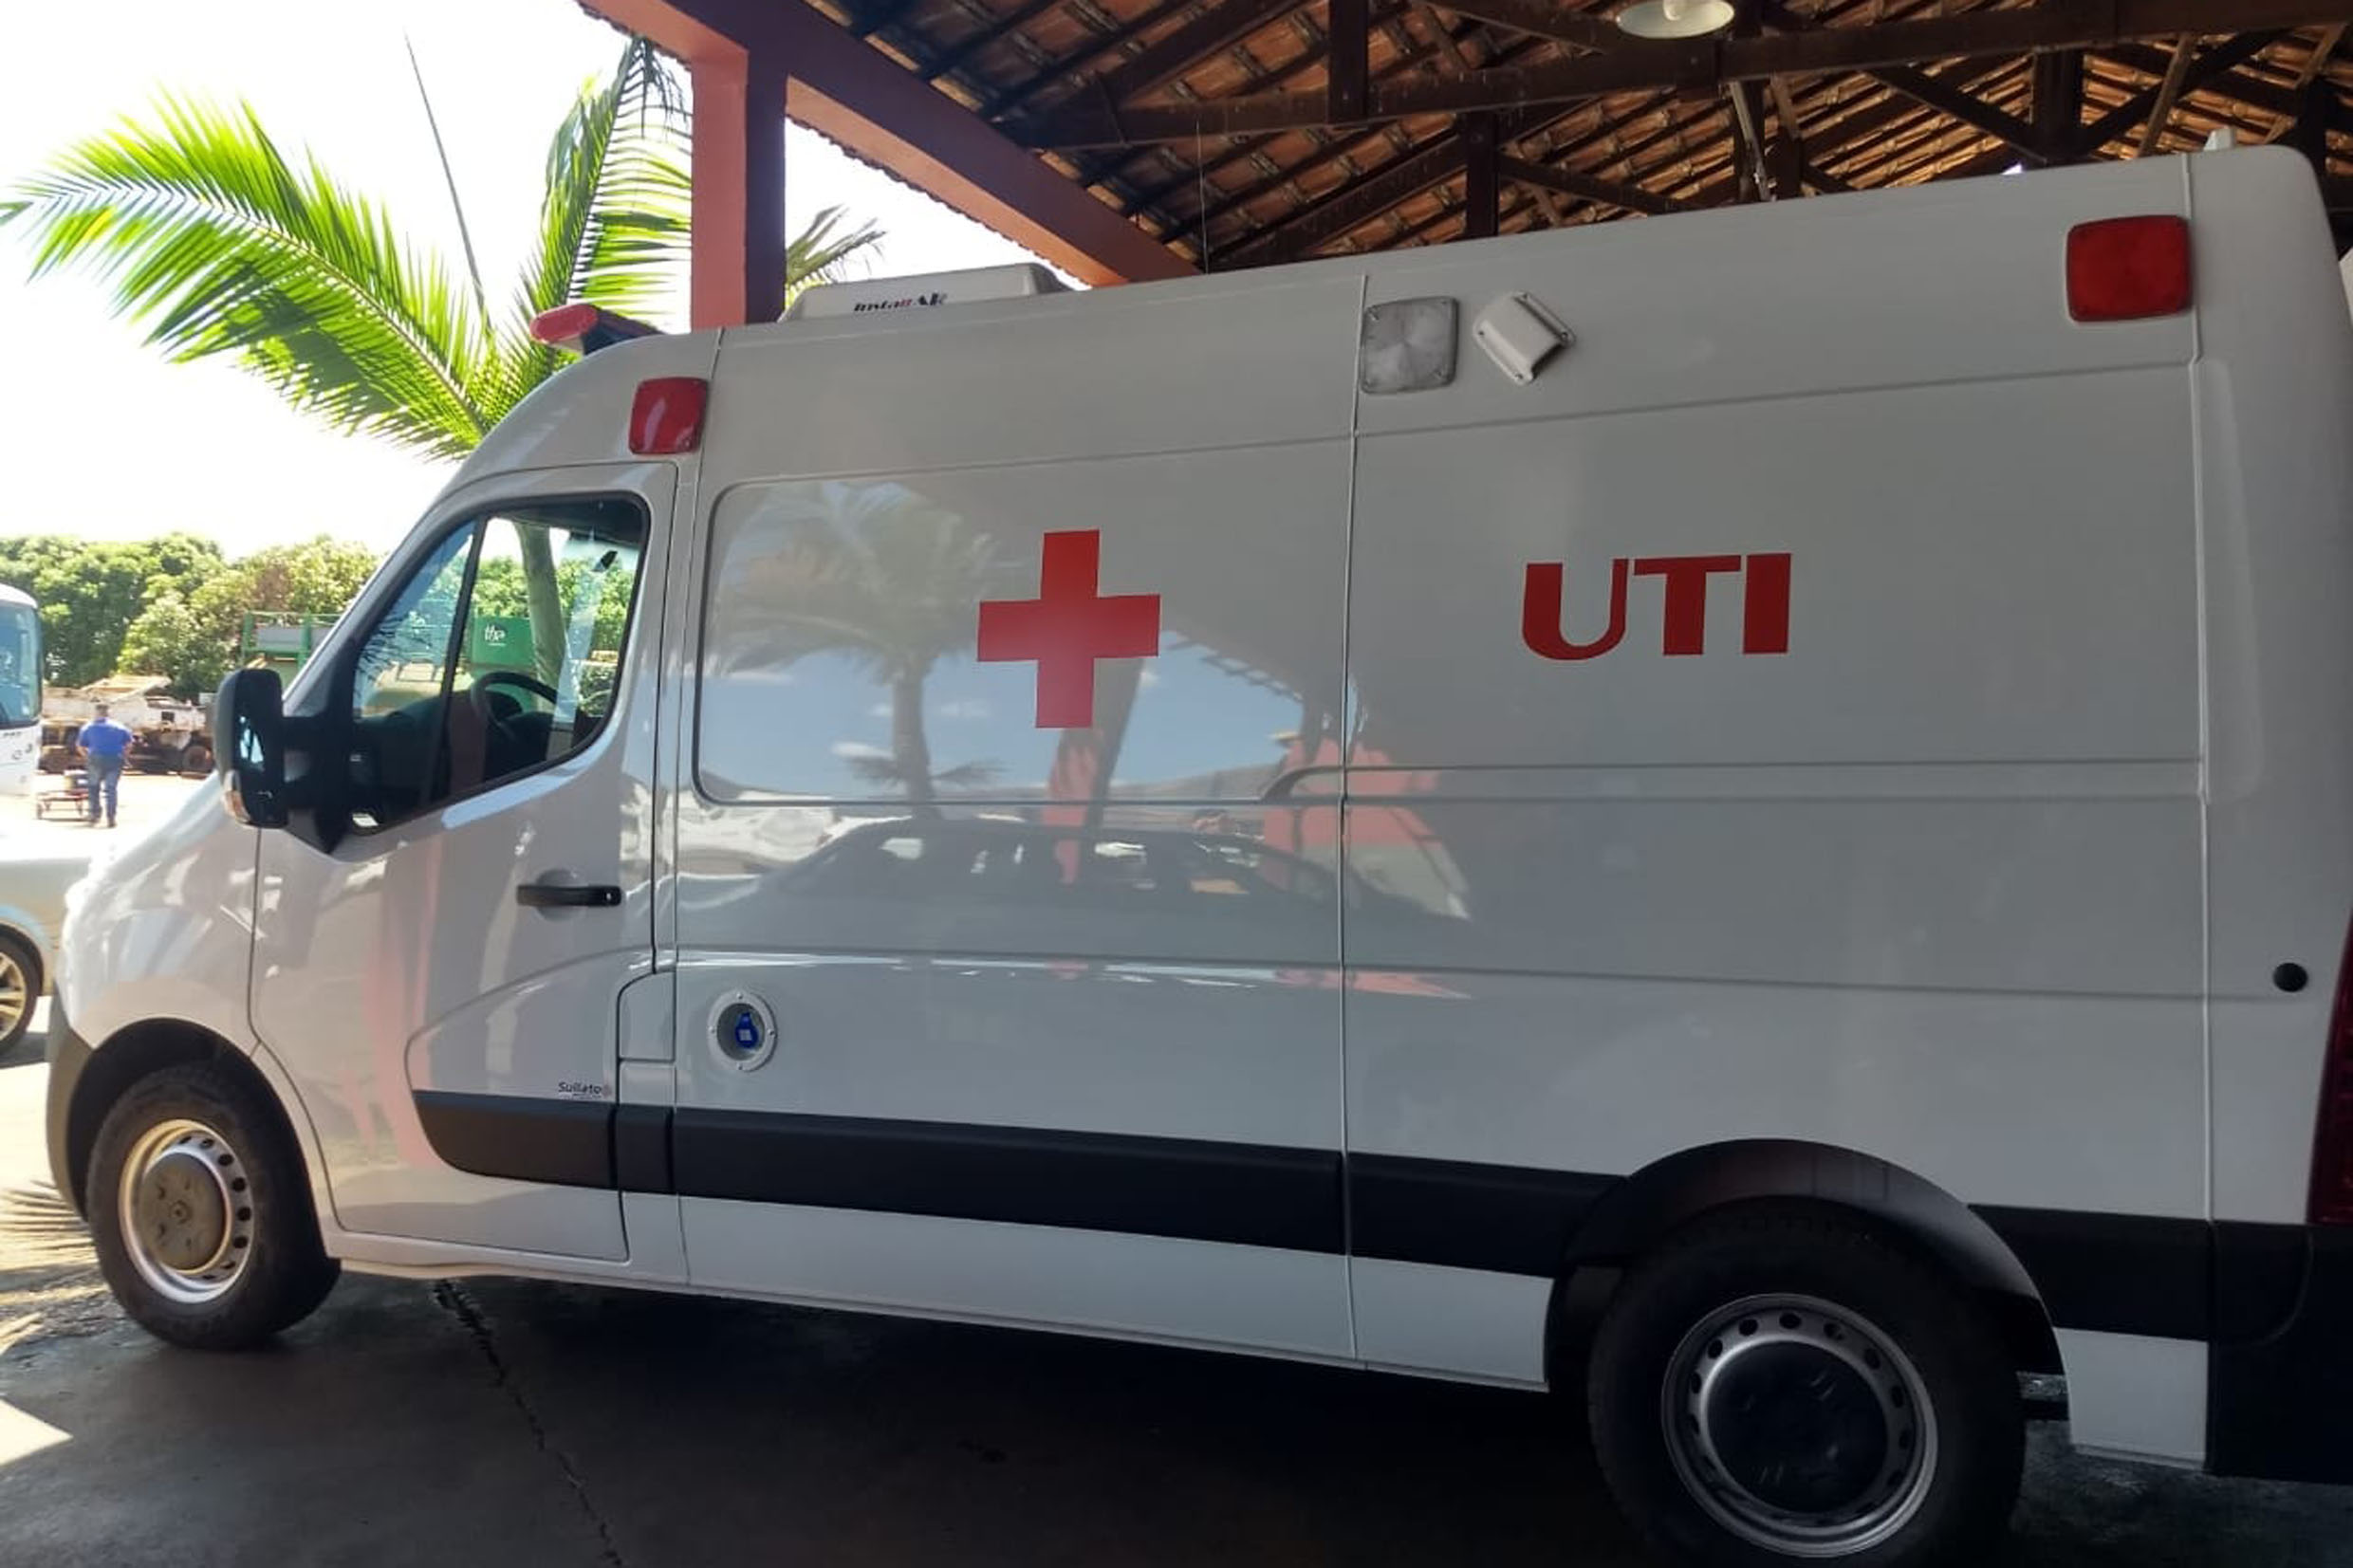 Ambulncia UTI <a style='float:right' href='https://www3.al.sp.gov.br/repositorio/noticia/N-11-2020/fg258373.jpg' target=_blank><img src='/_img/material-file-download-white.png' width='14px' alt='Clique para baixar a imagem'></a>